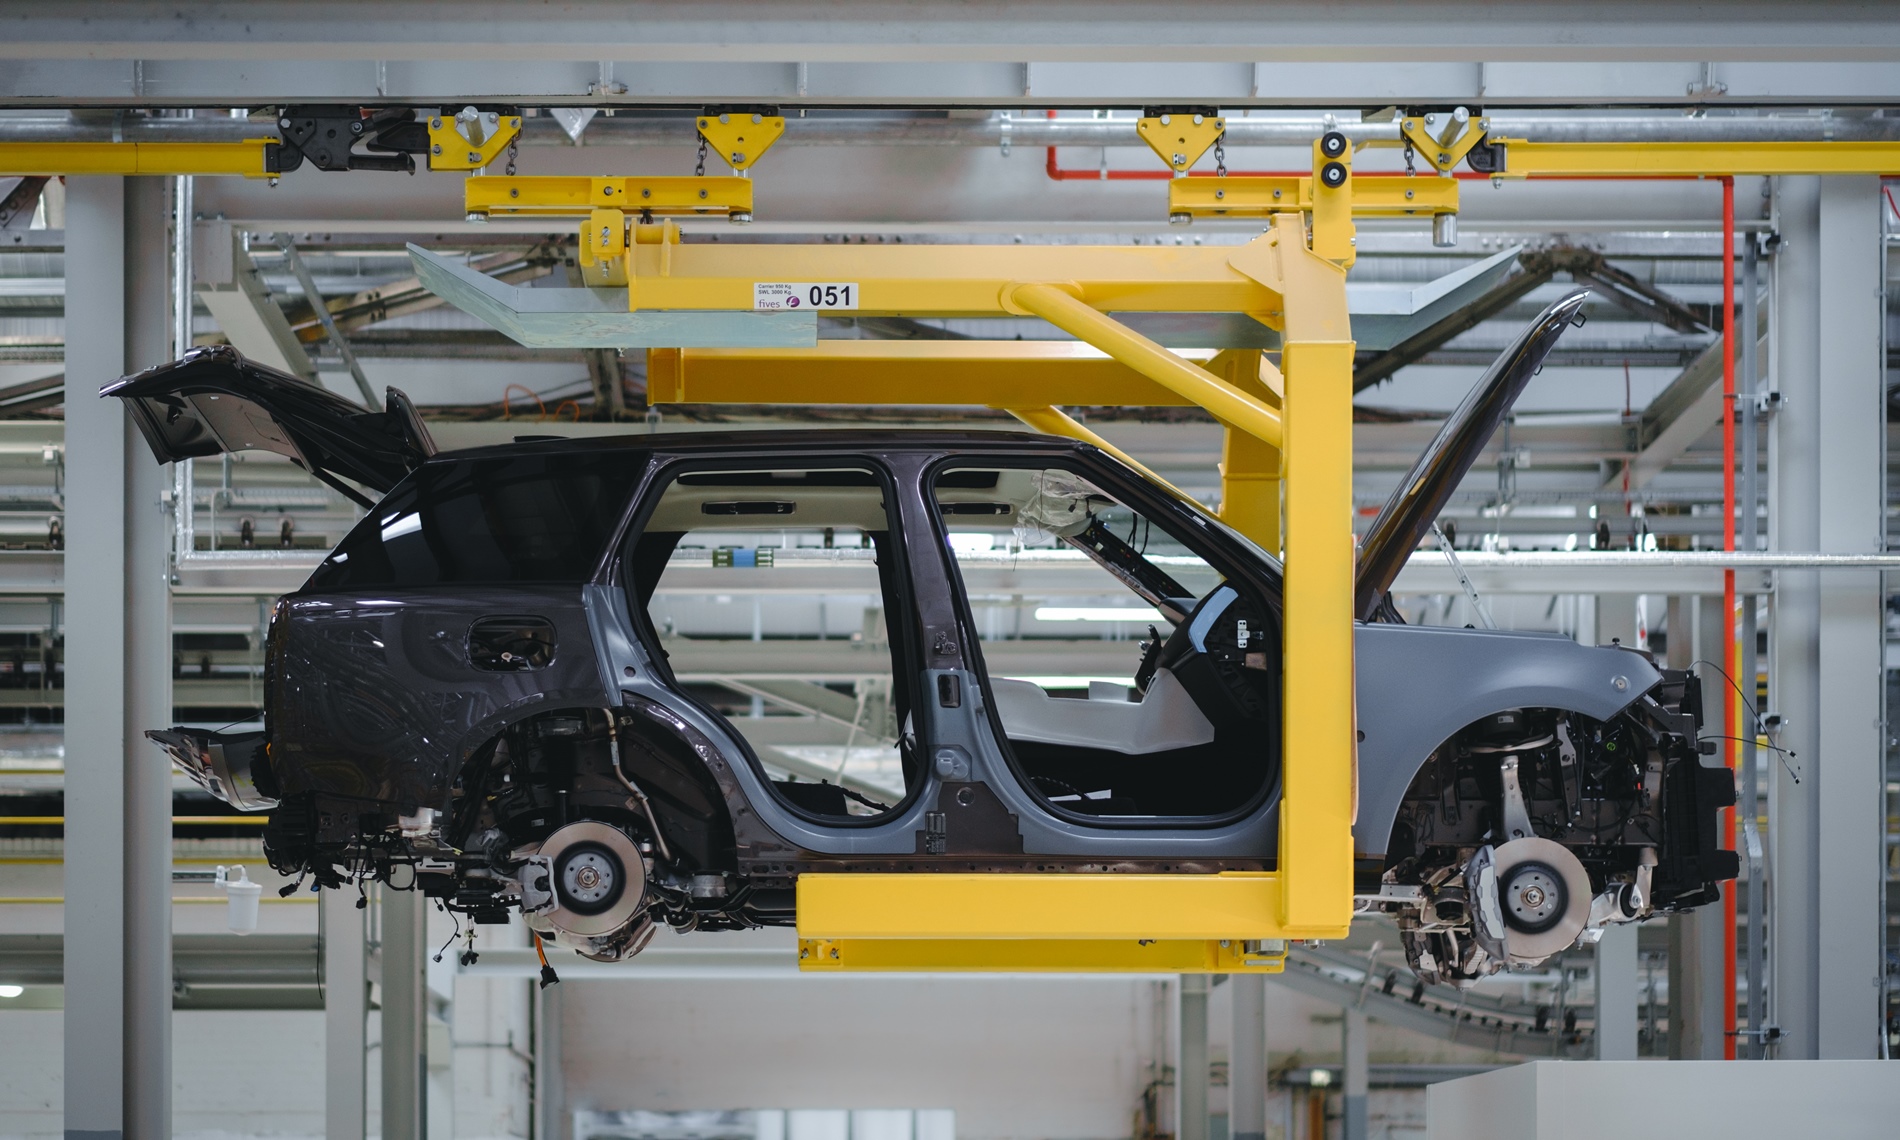 The Jaguar Land Rover (JLR) factory at Solihull in the United Kingdom.